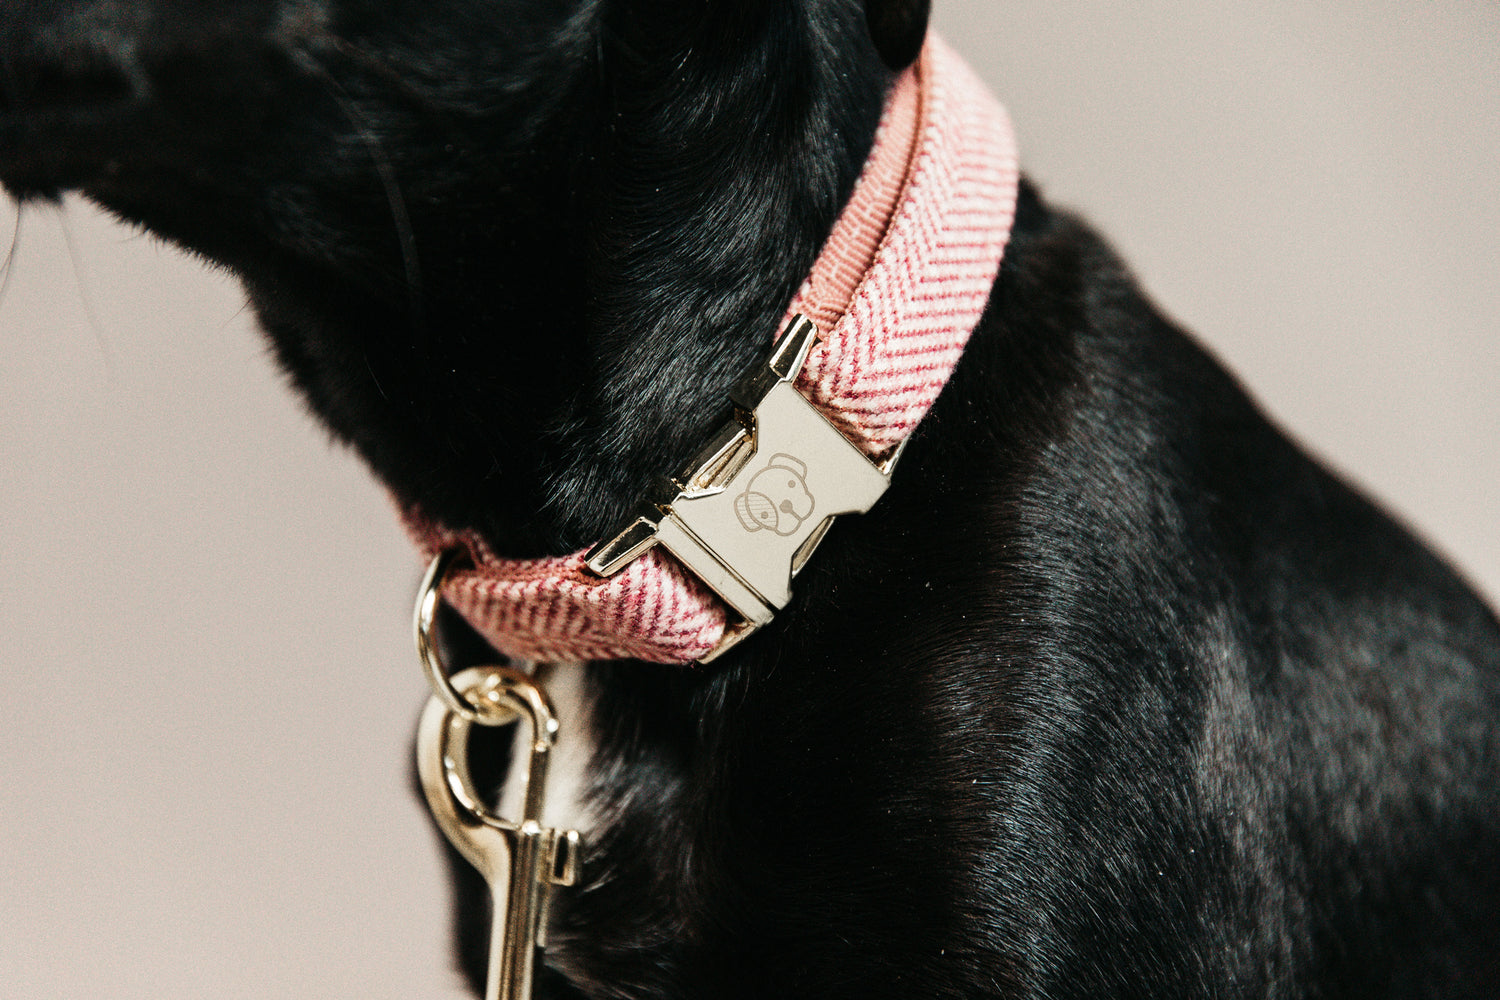 This Kentucky Dog Collar Wool will give your dog a sophisticated  look in any circumstances! The diagonal stipe fabric on the outside gives it a wool like aspect, without using any animal ingredient. On the inside, the collar is reinforced with nylon to assure comfort and extra strength.